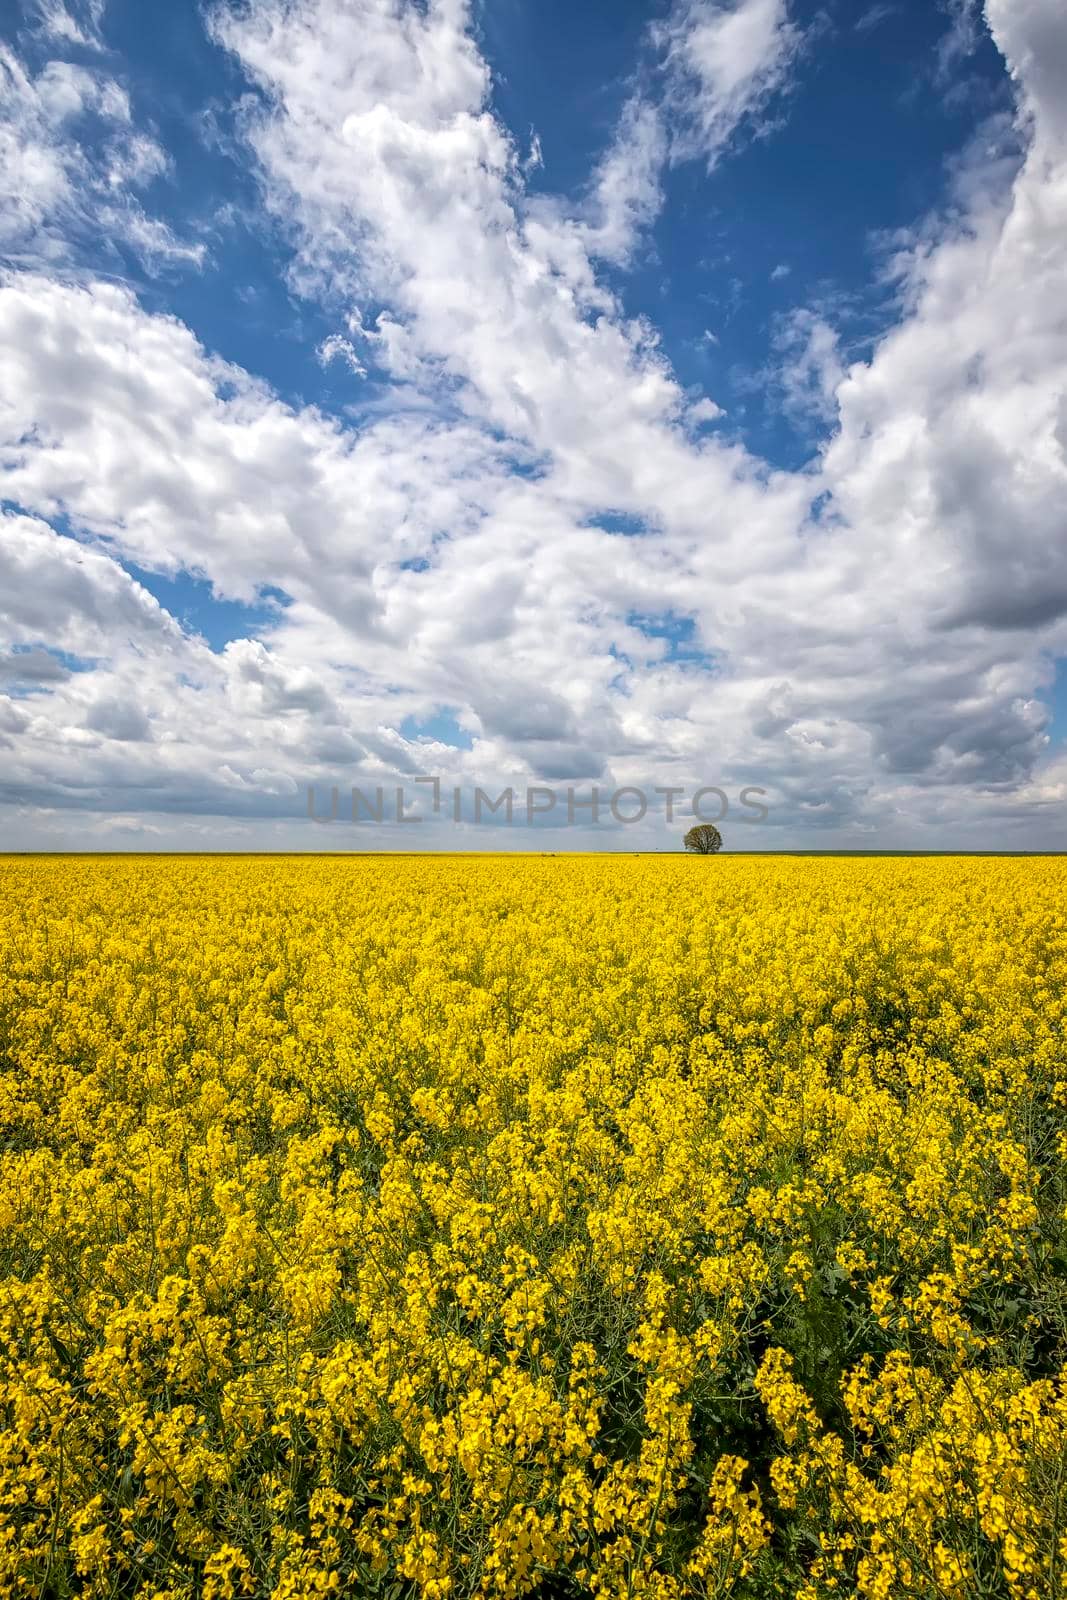 Day landscape with yellow rapeseed field with a lonely tree and amazing sky with clouds by EdVal